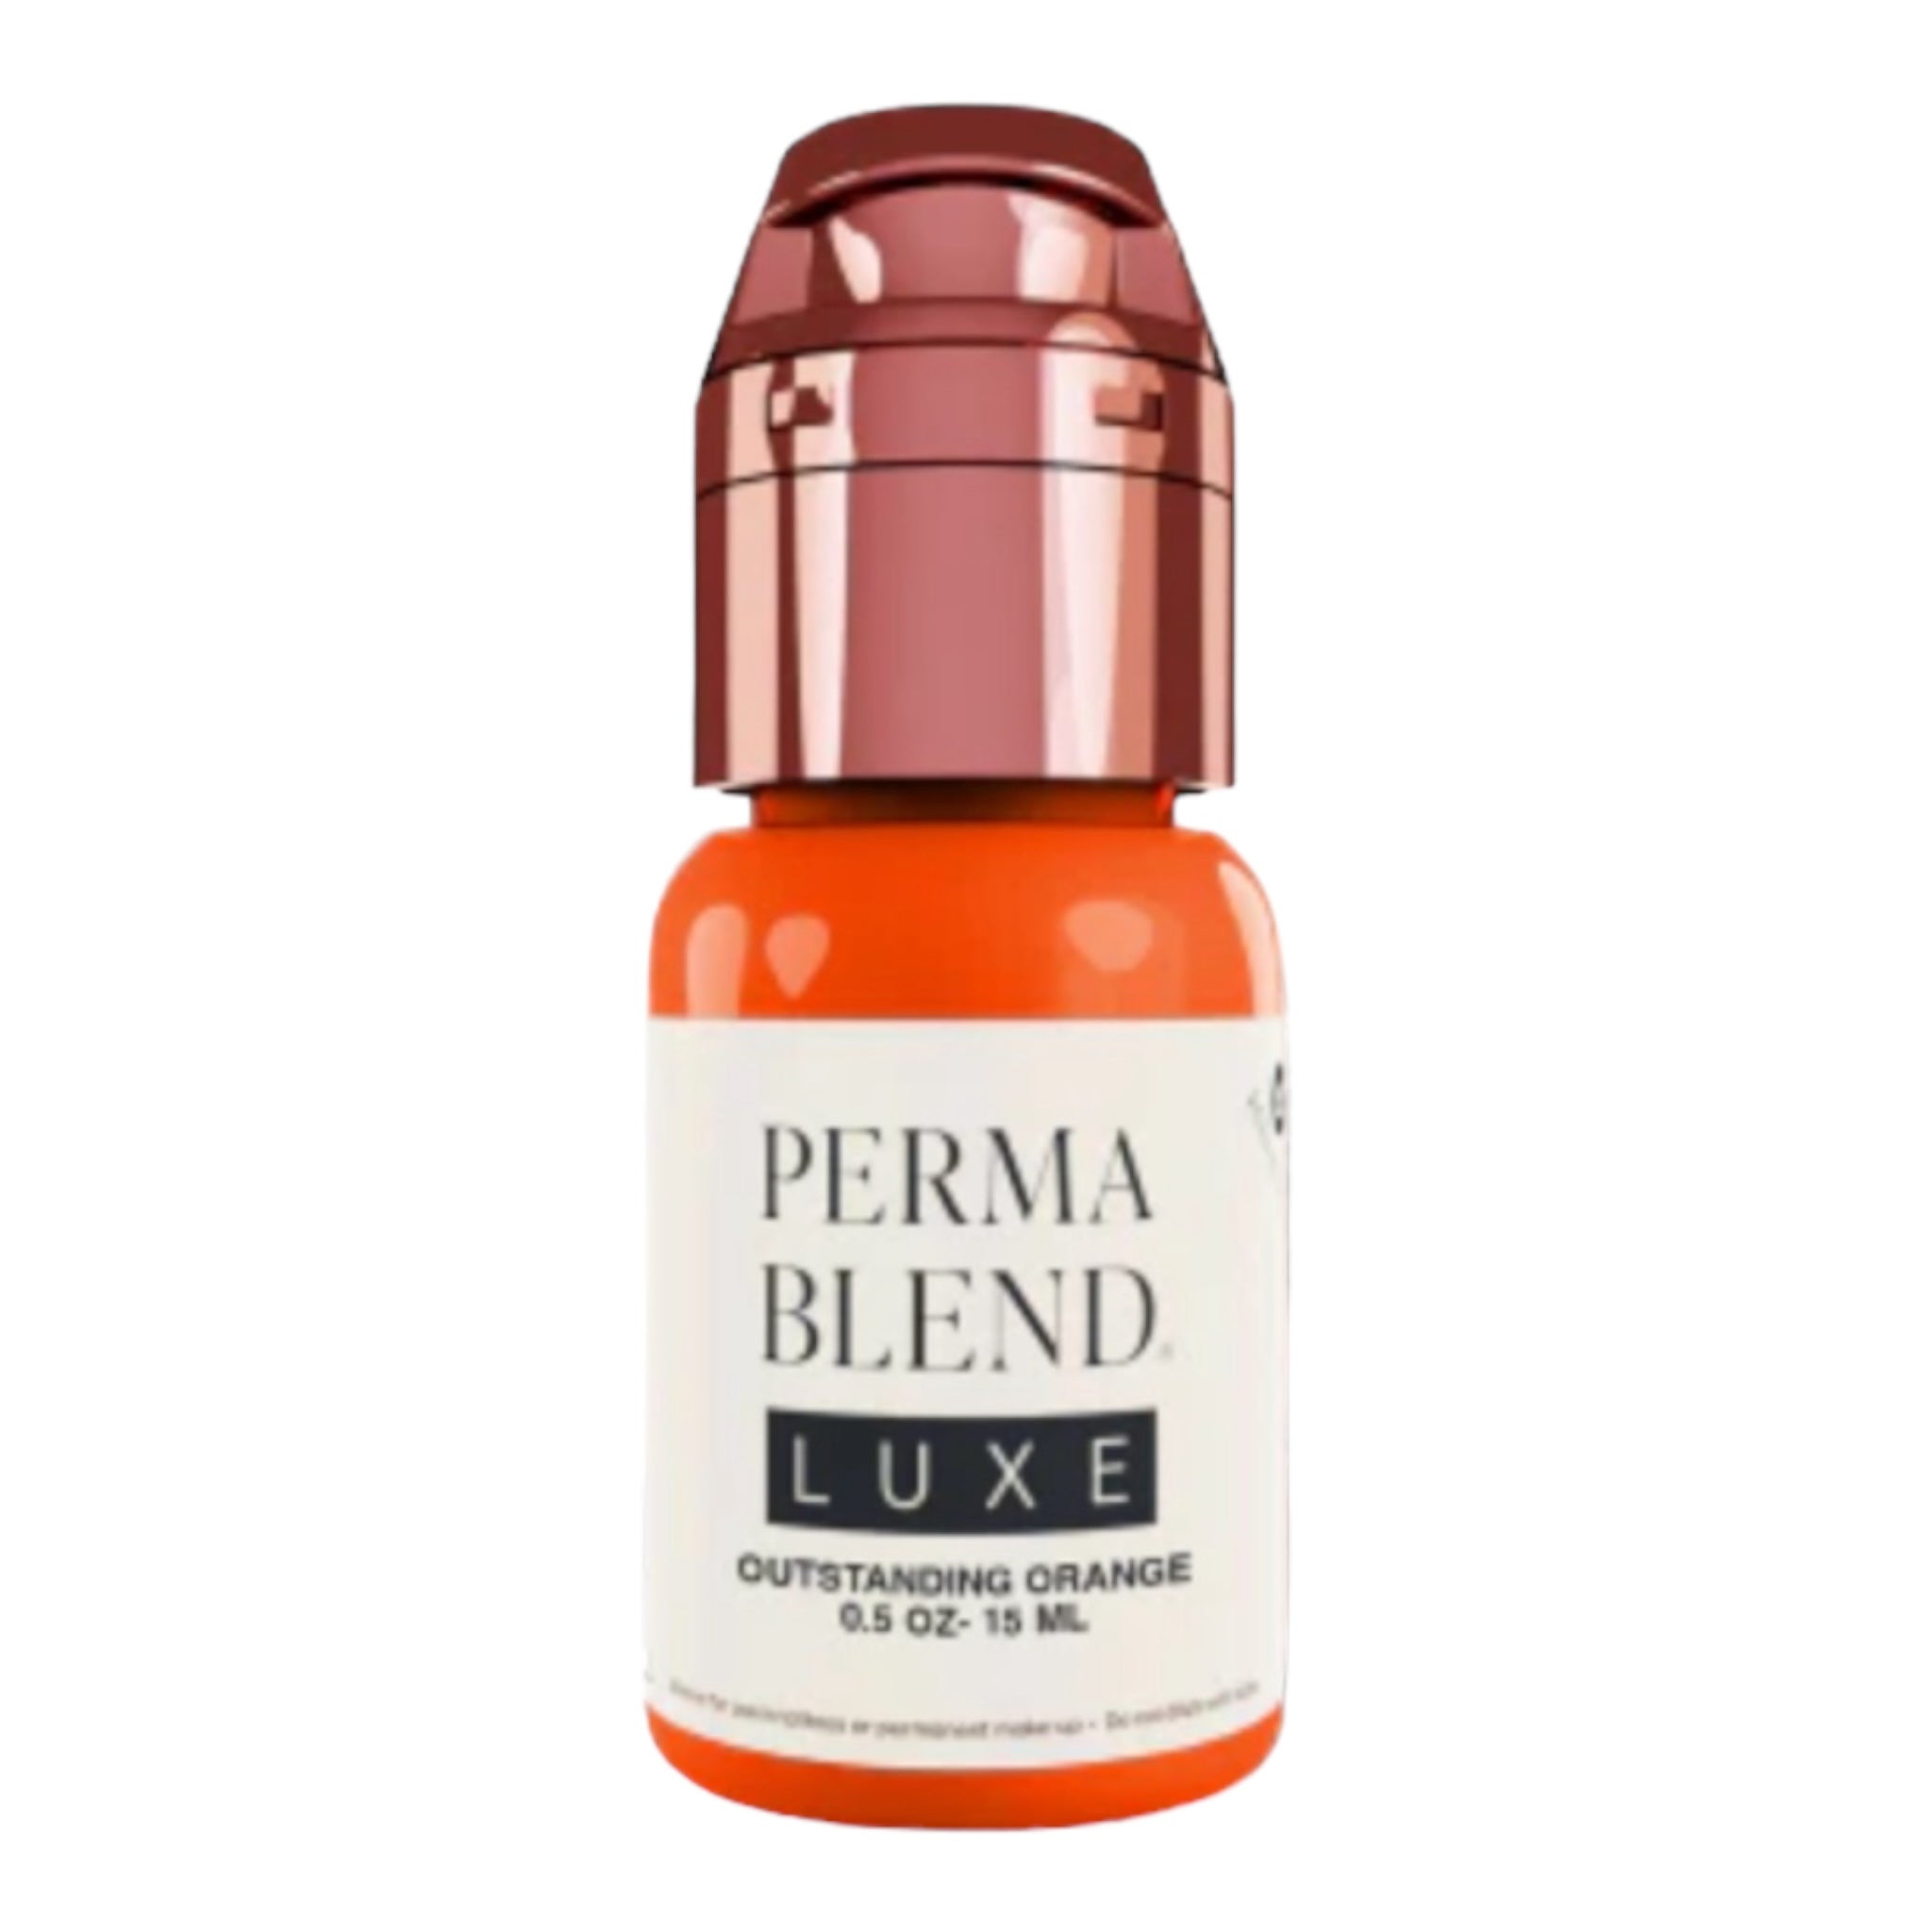 Encre Maquillage Perma Blend Luxe 15ml - Outstanding Orange